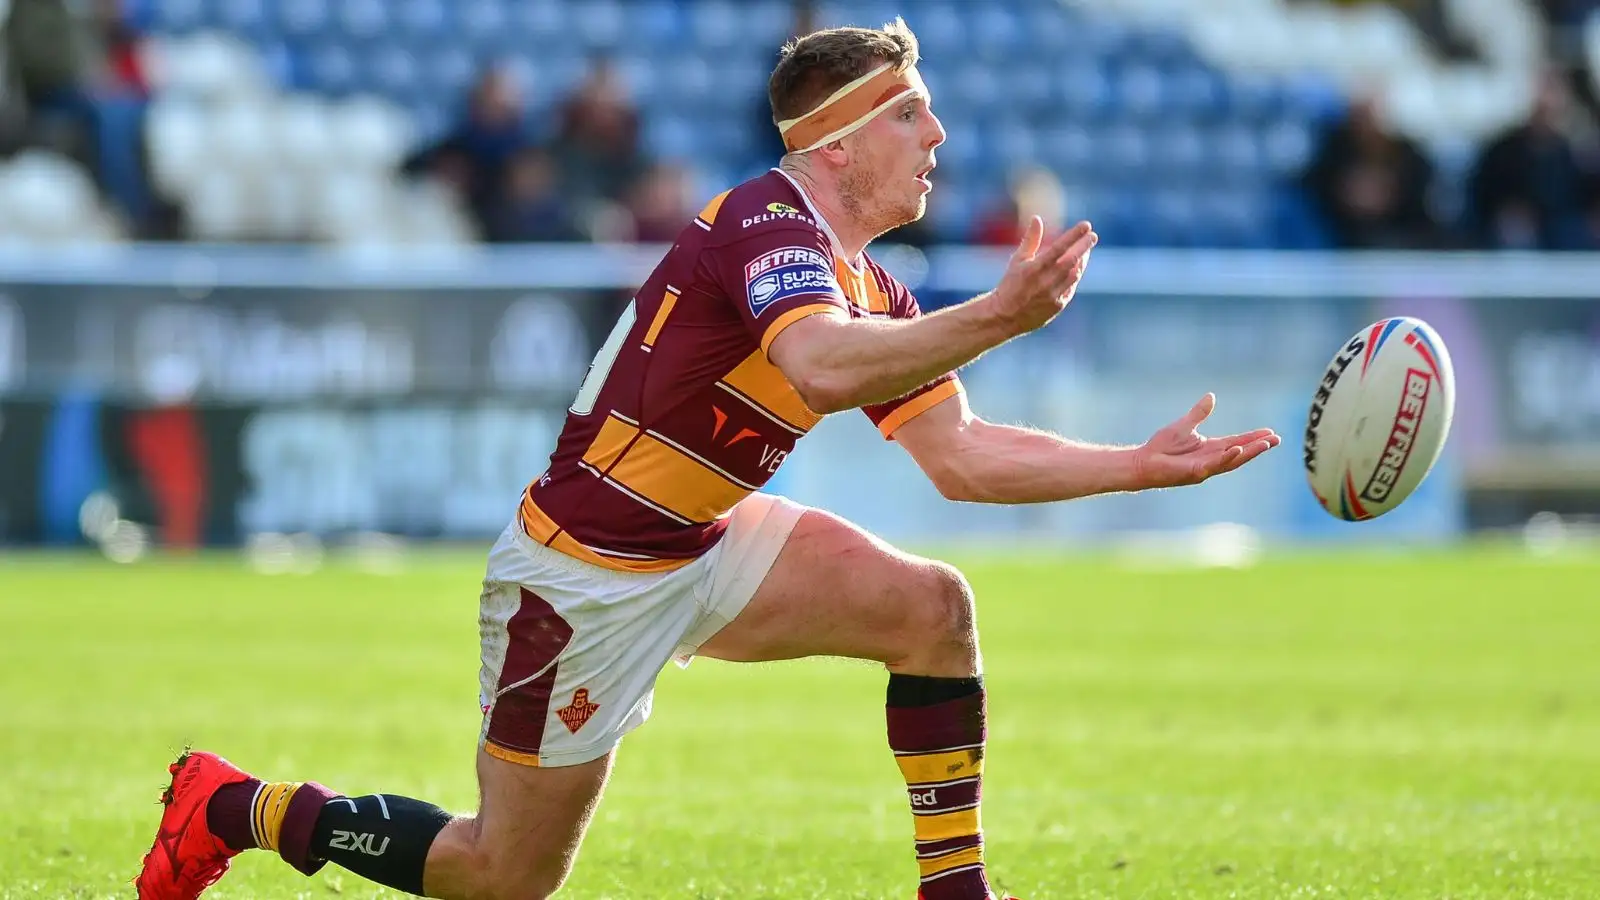 Ex-Huddersfield Giants hooker makes Championship switch: ‘I’m absolutely buzzing to be back at my hometown club’